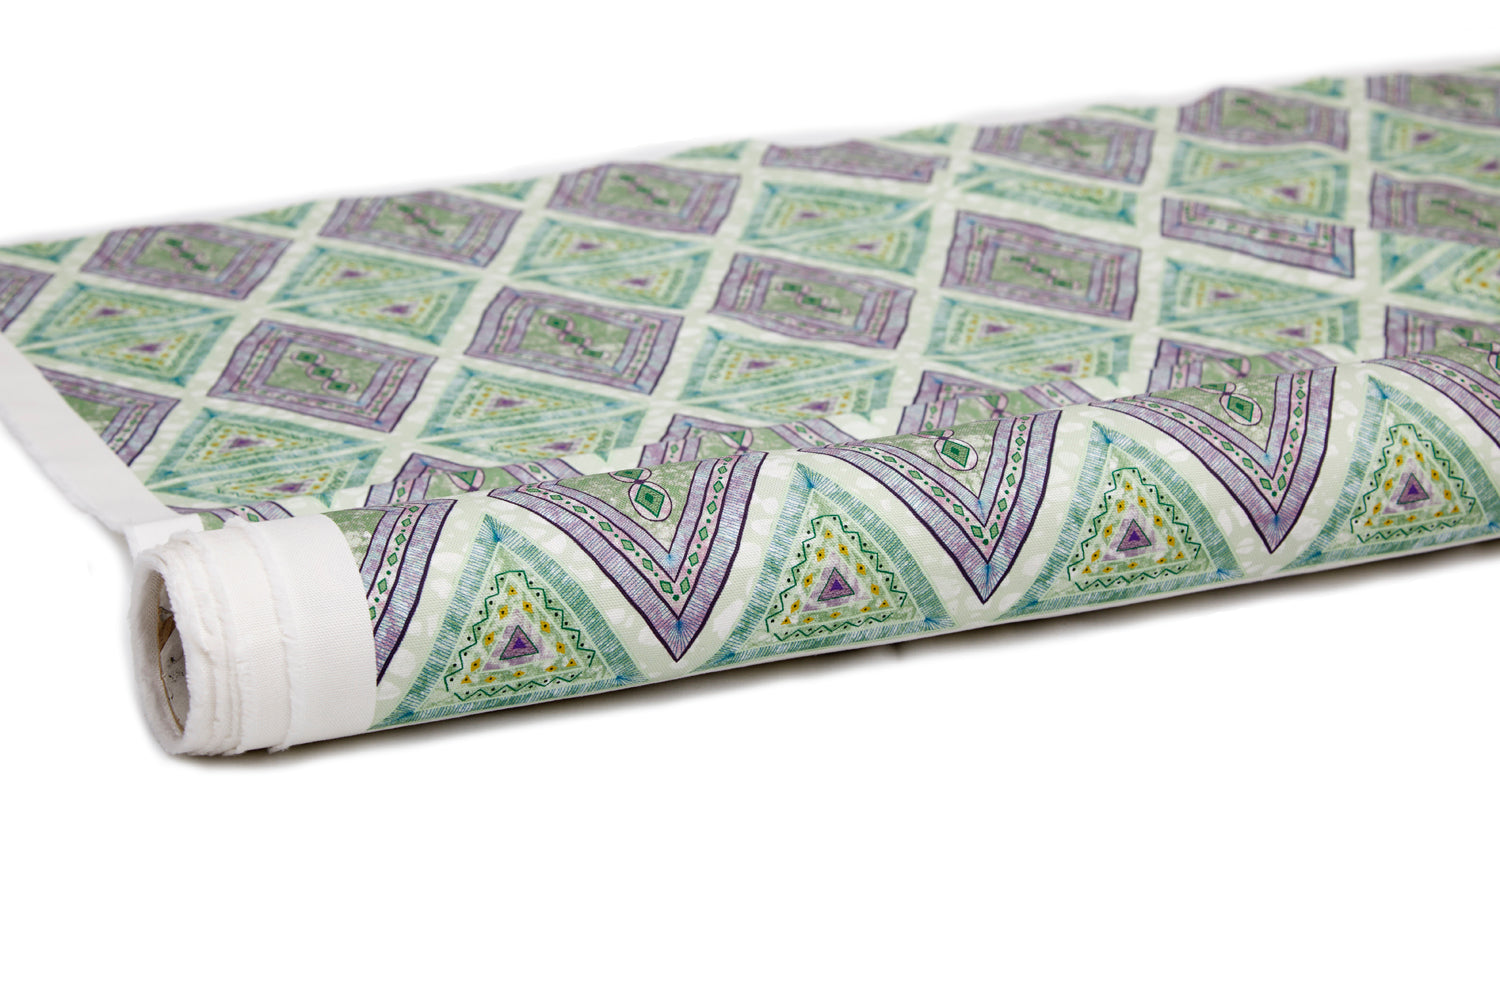 Partially unrolled fabric in an intricate diamond grid pattern in shades of green and purple.